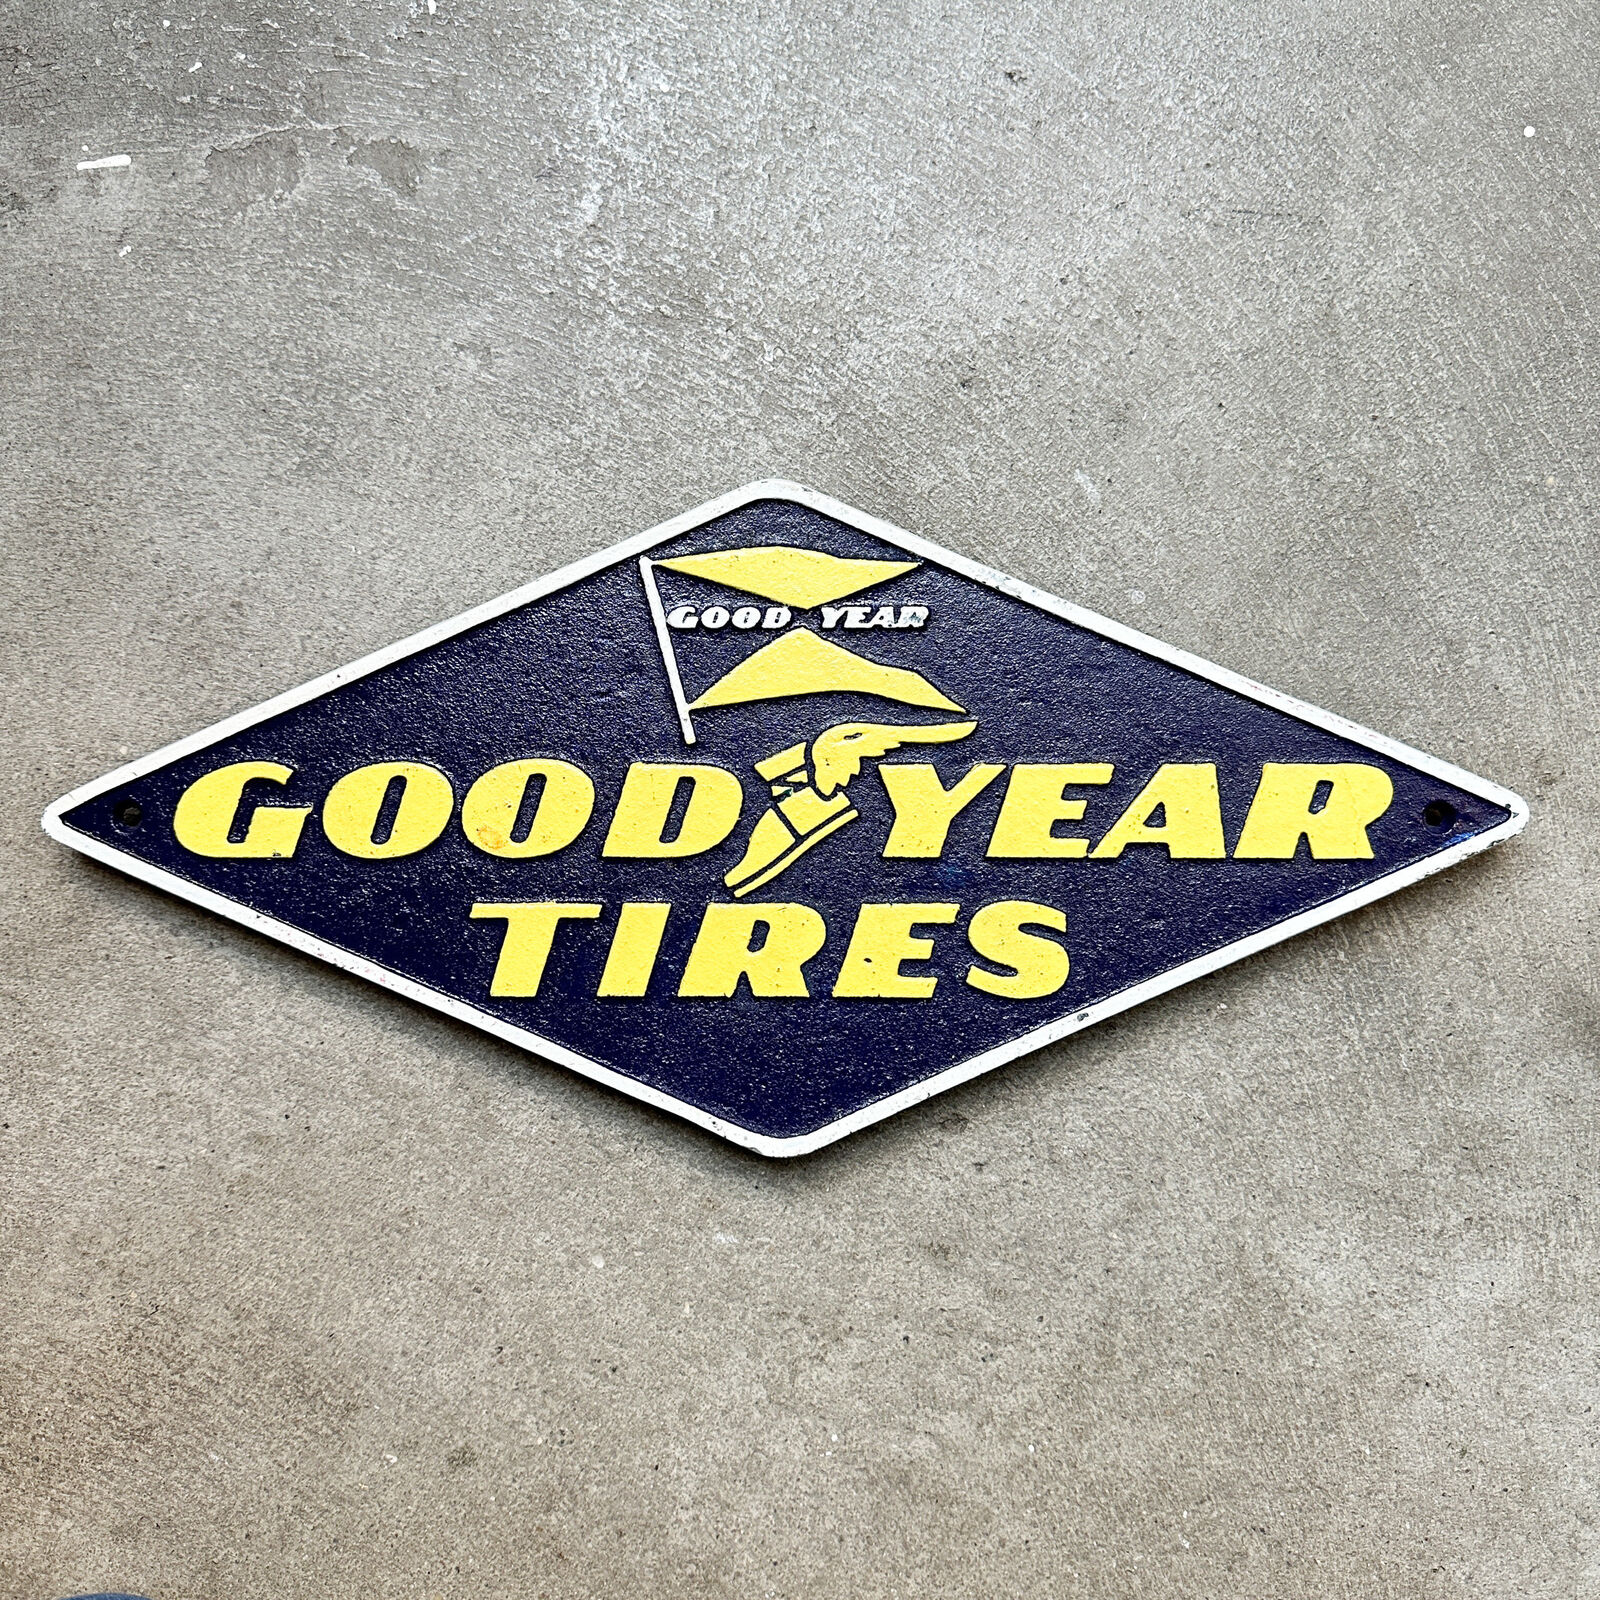 Antique Goodyear Tires Cast Iron Advertising Display Sign